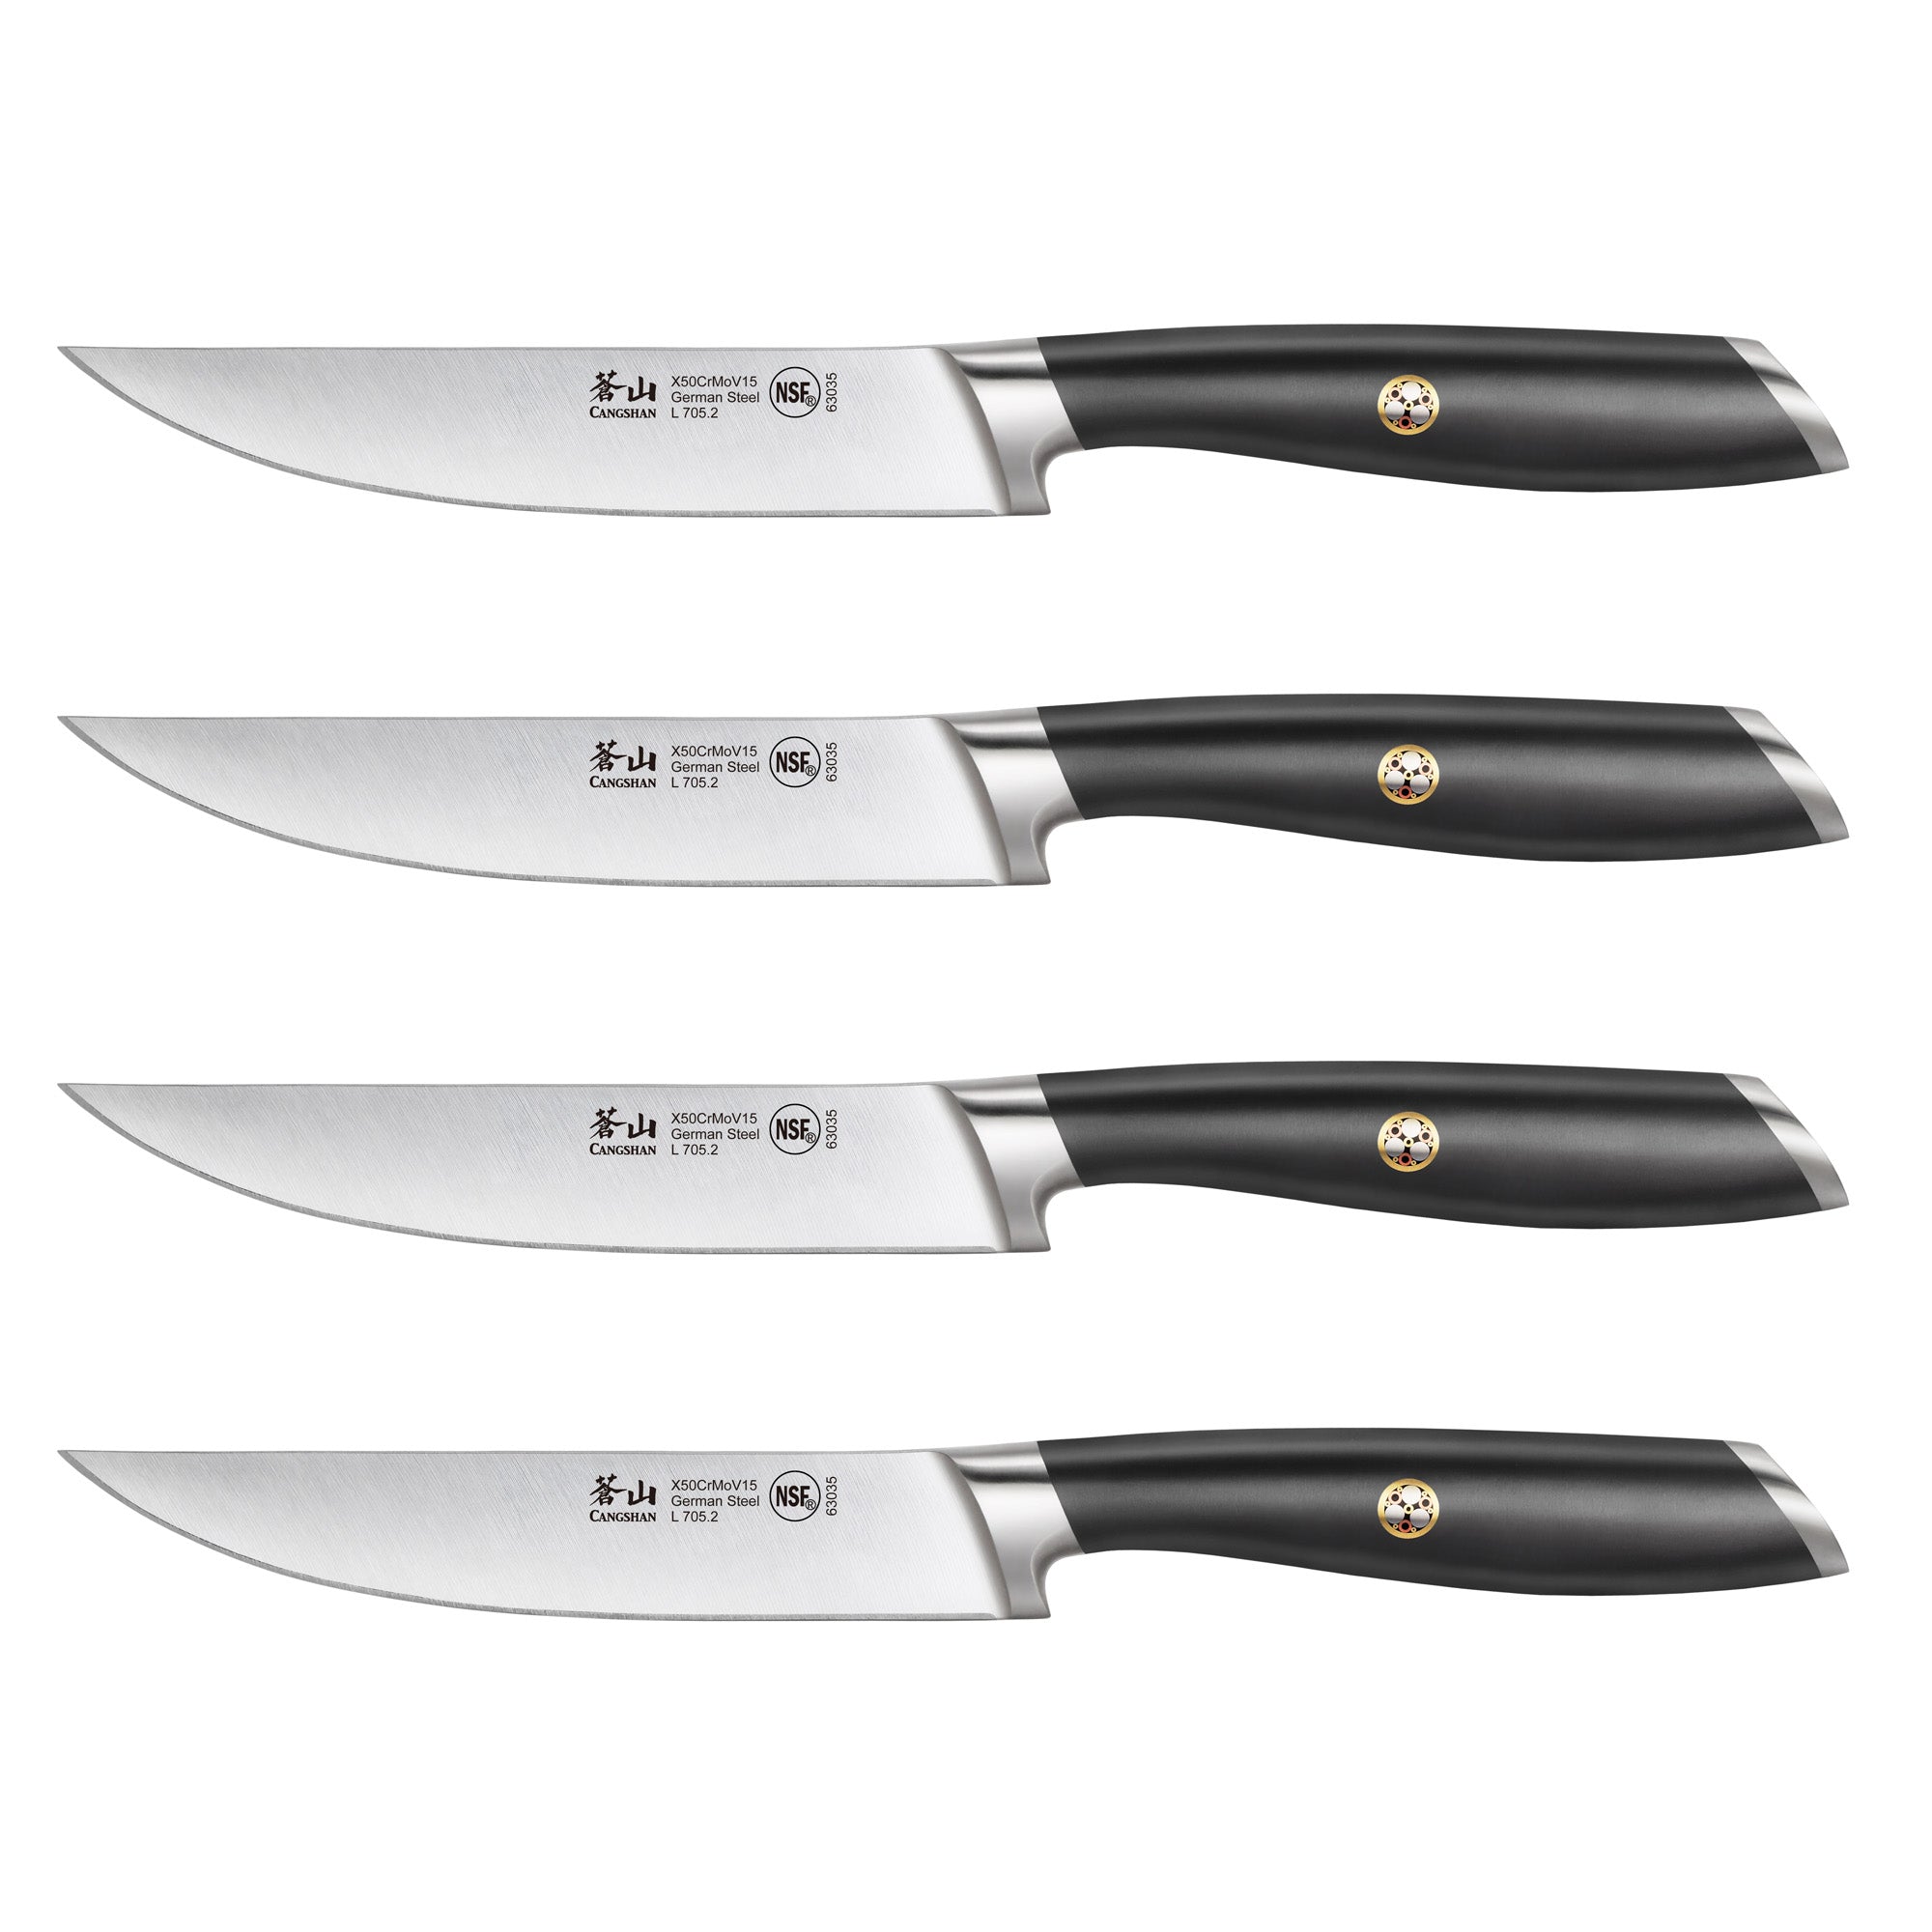 ALPS Series 4-Piece Steak Knife Set with Sheaths, Forged German